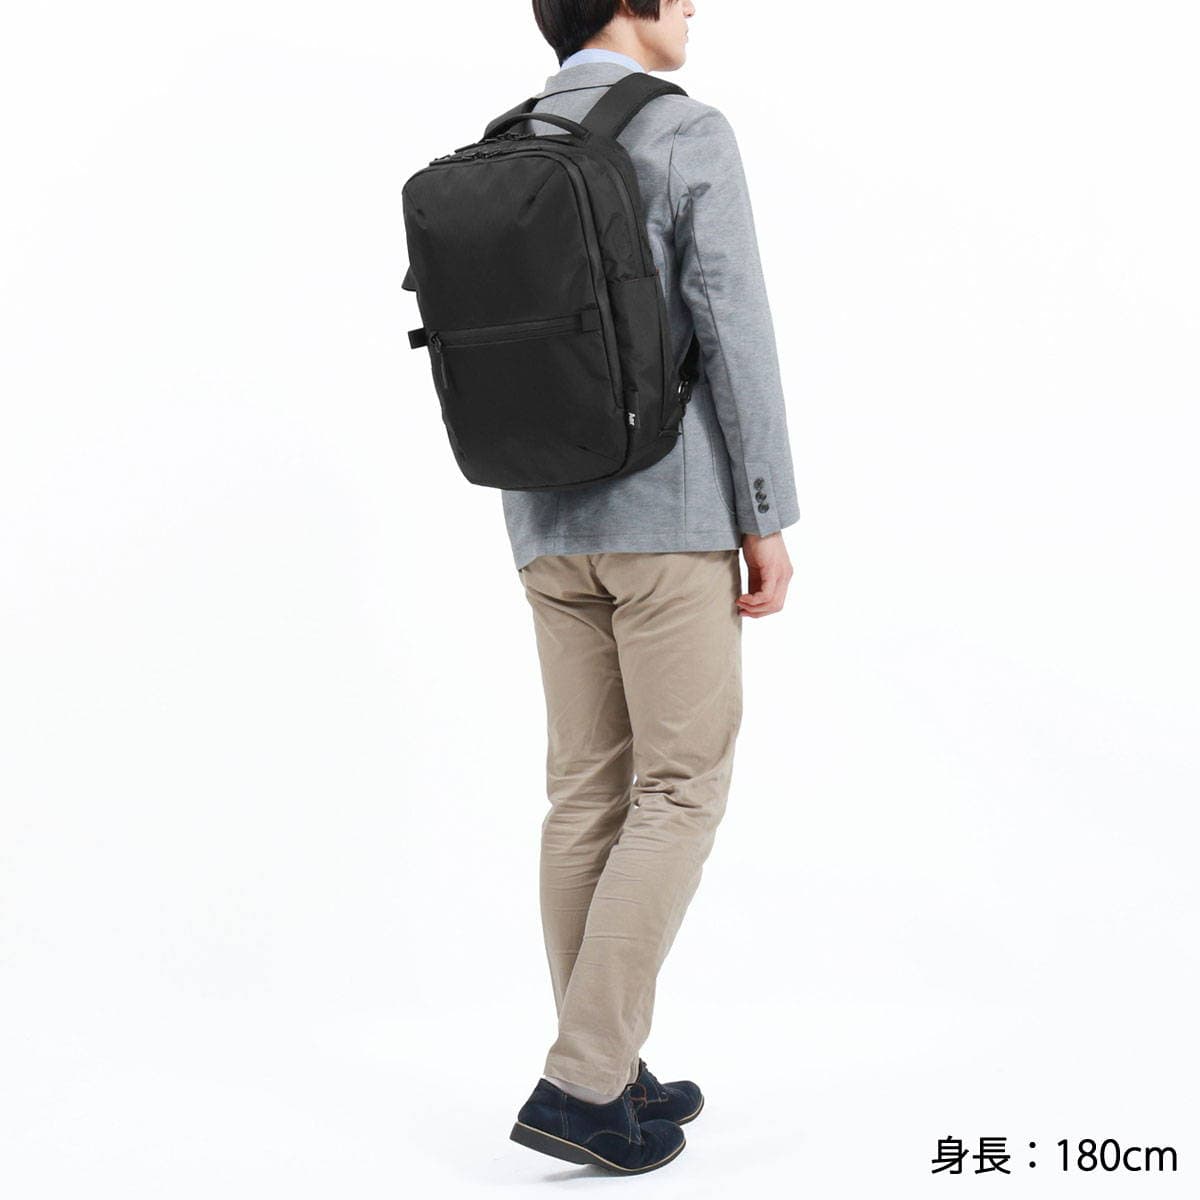 Aer エアー Travel Collection Flight Pack 3X-Pac 3wayバックパック